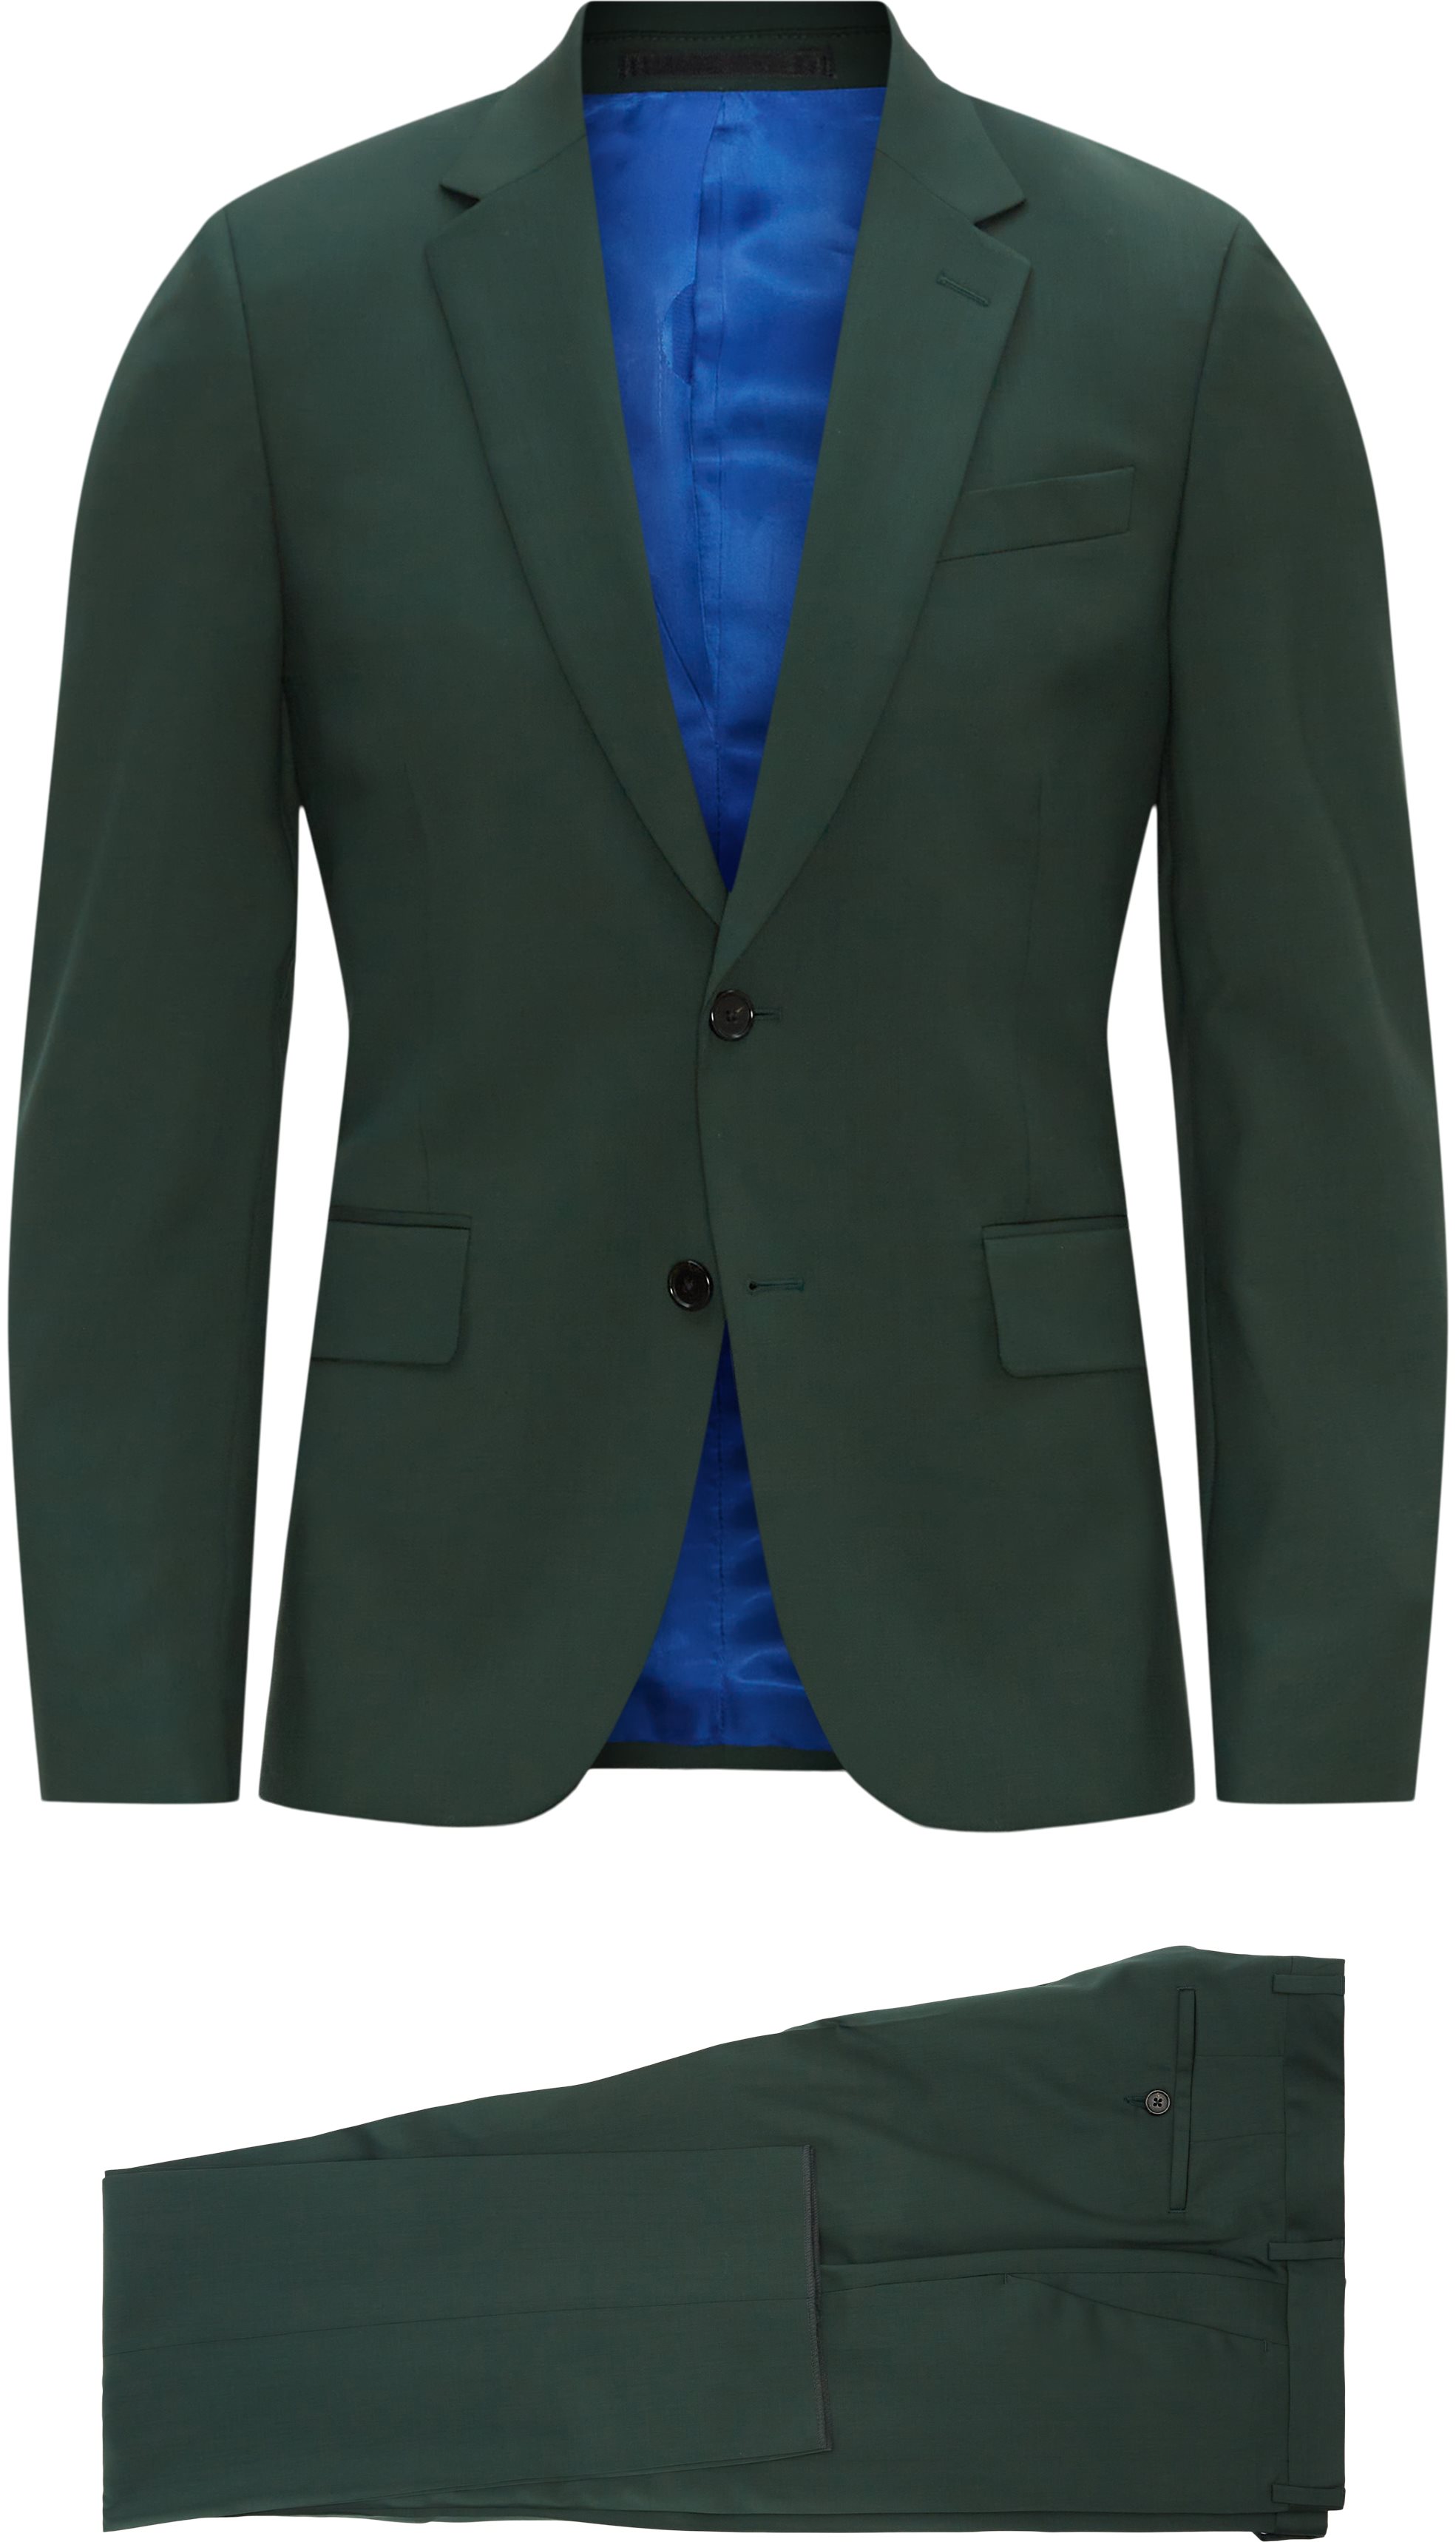 Paul Smith Mainline Suits 1457 L02097 SOHO FIT Green